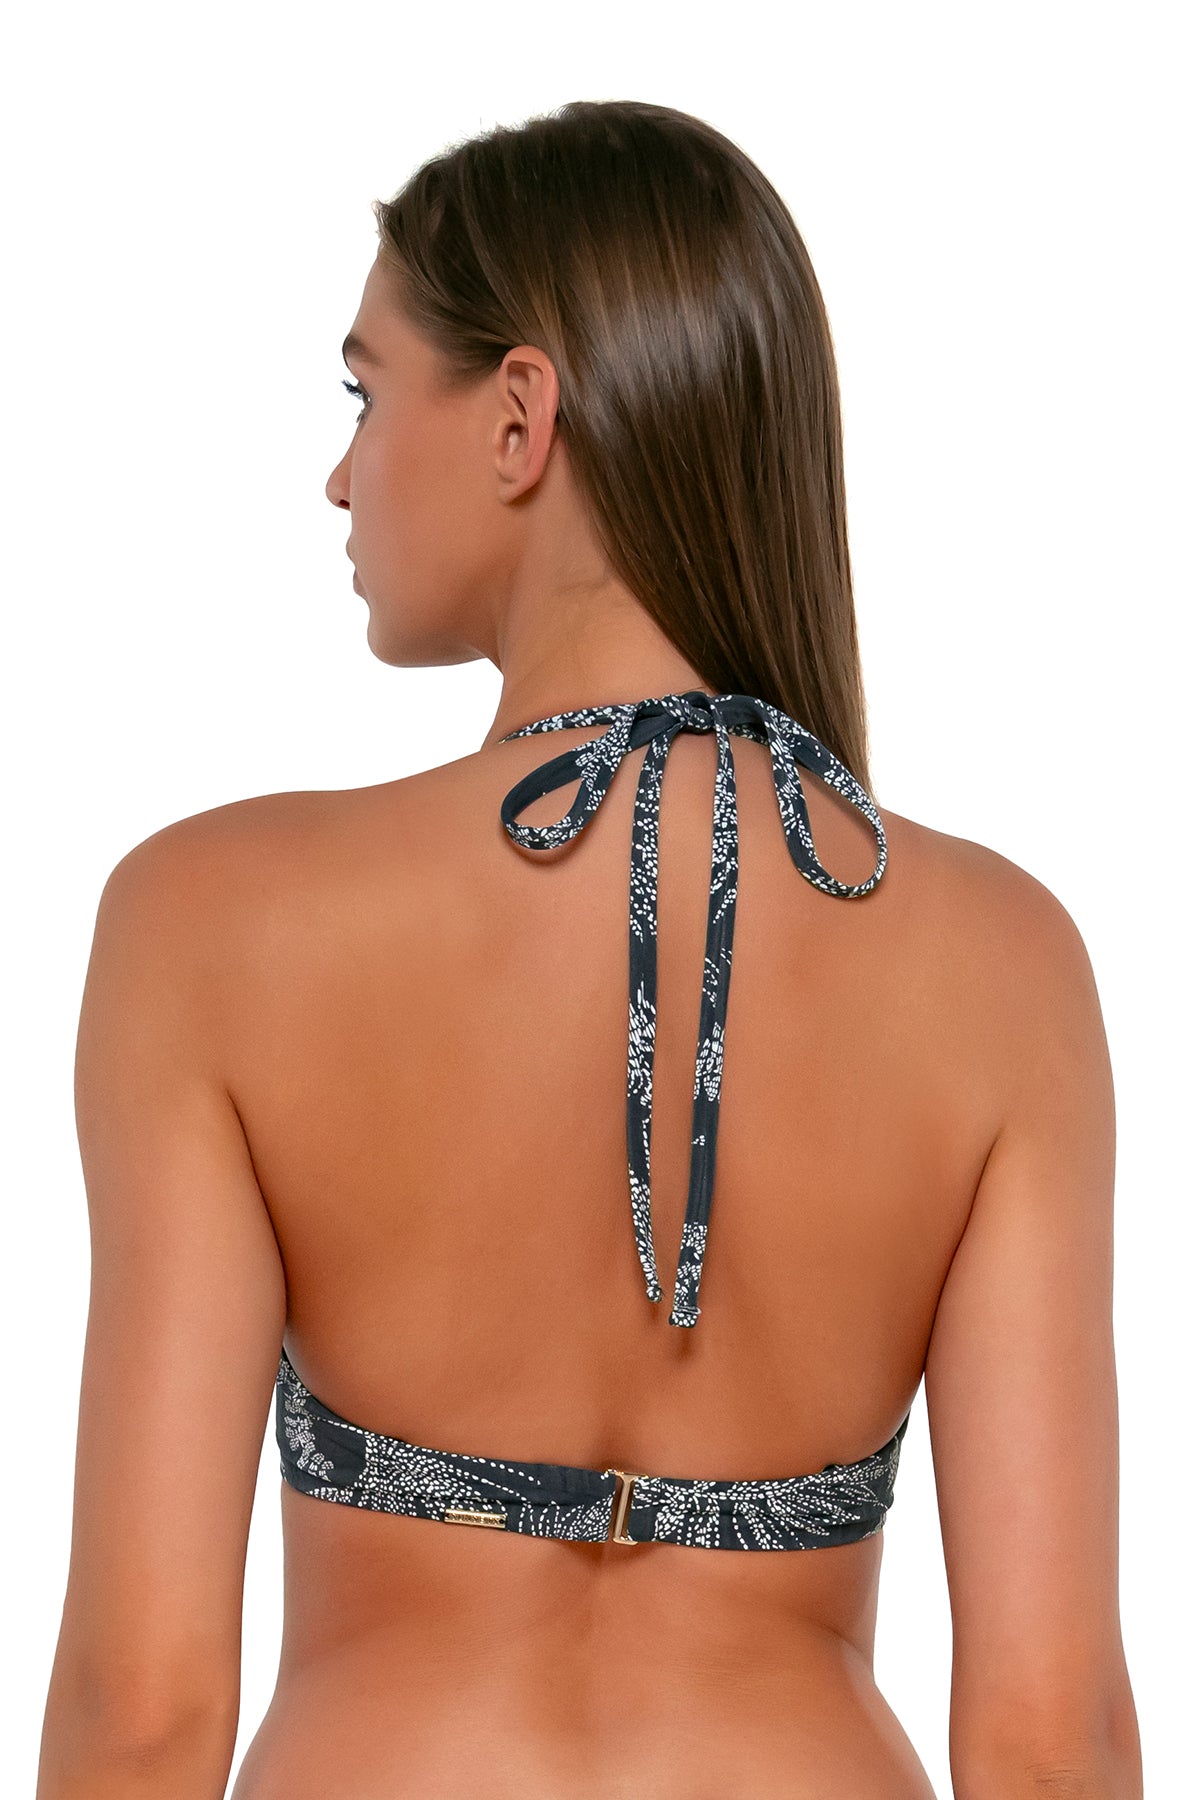 Back pose #1 of Daria wearing Sunsets Fanfare Seagrass Texture Brooke U-Wire Top showing over-the-shoulder tie